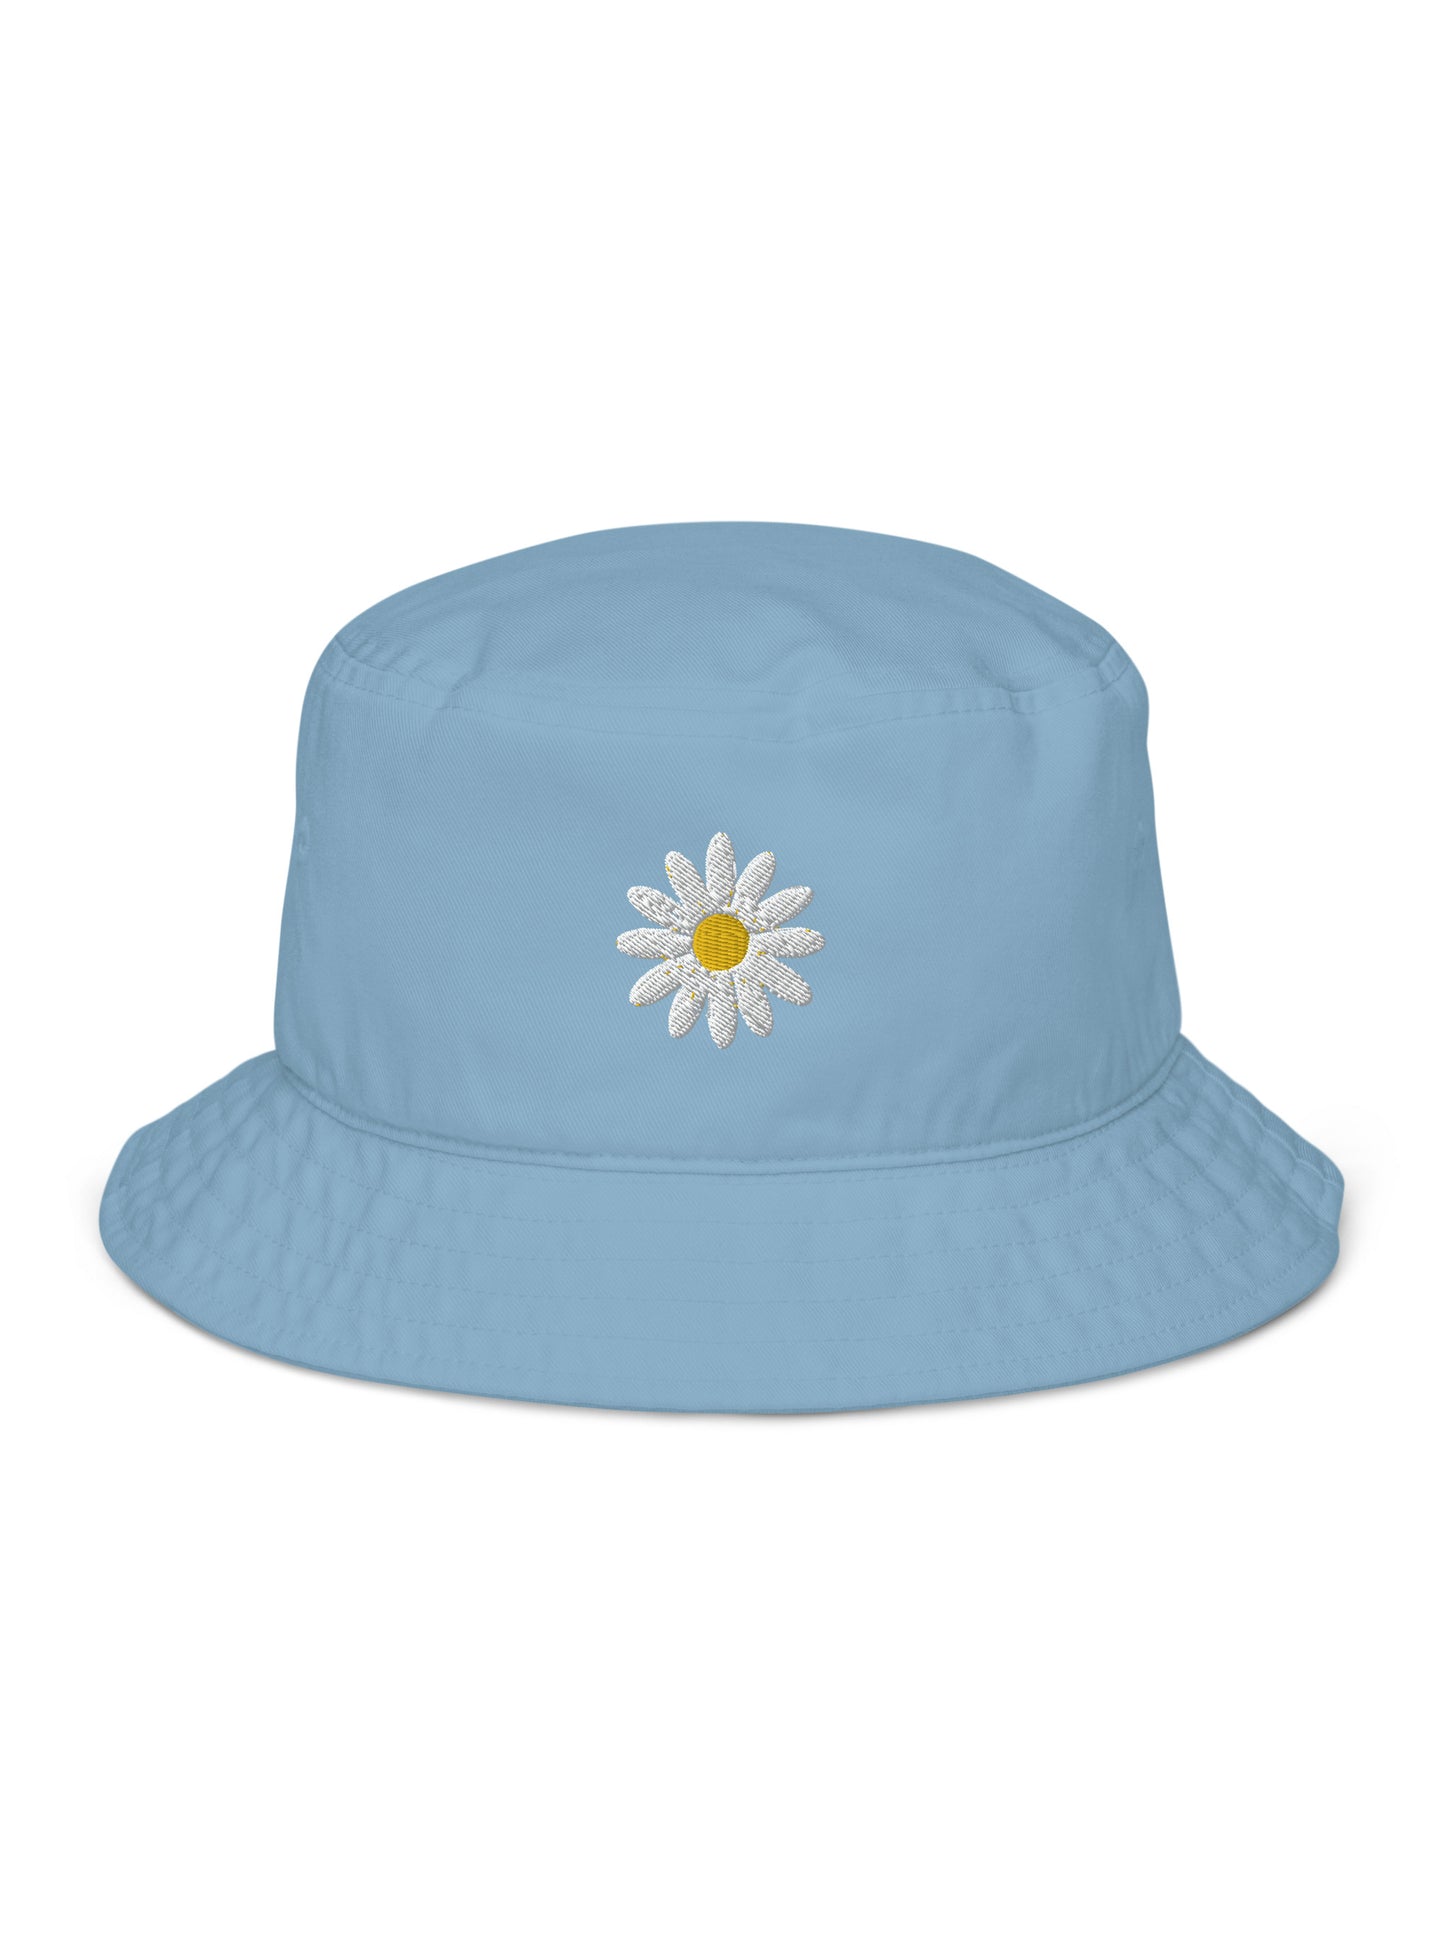 Amii Angel Classic Collection : Flower Bucket Hat Embroidered Logo (Organic)